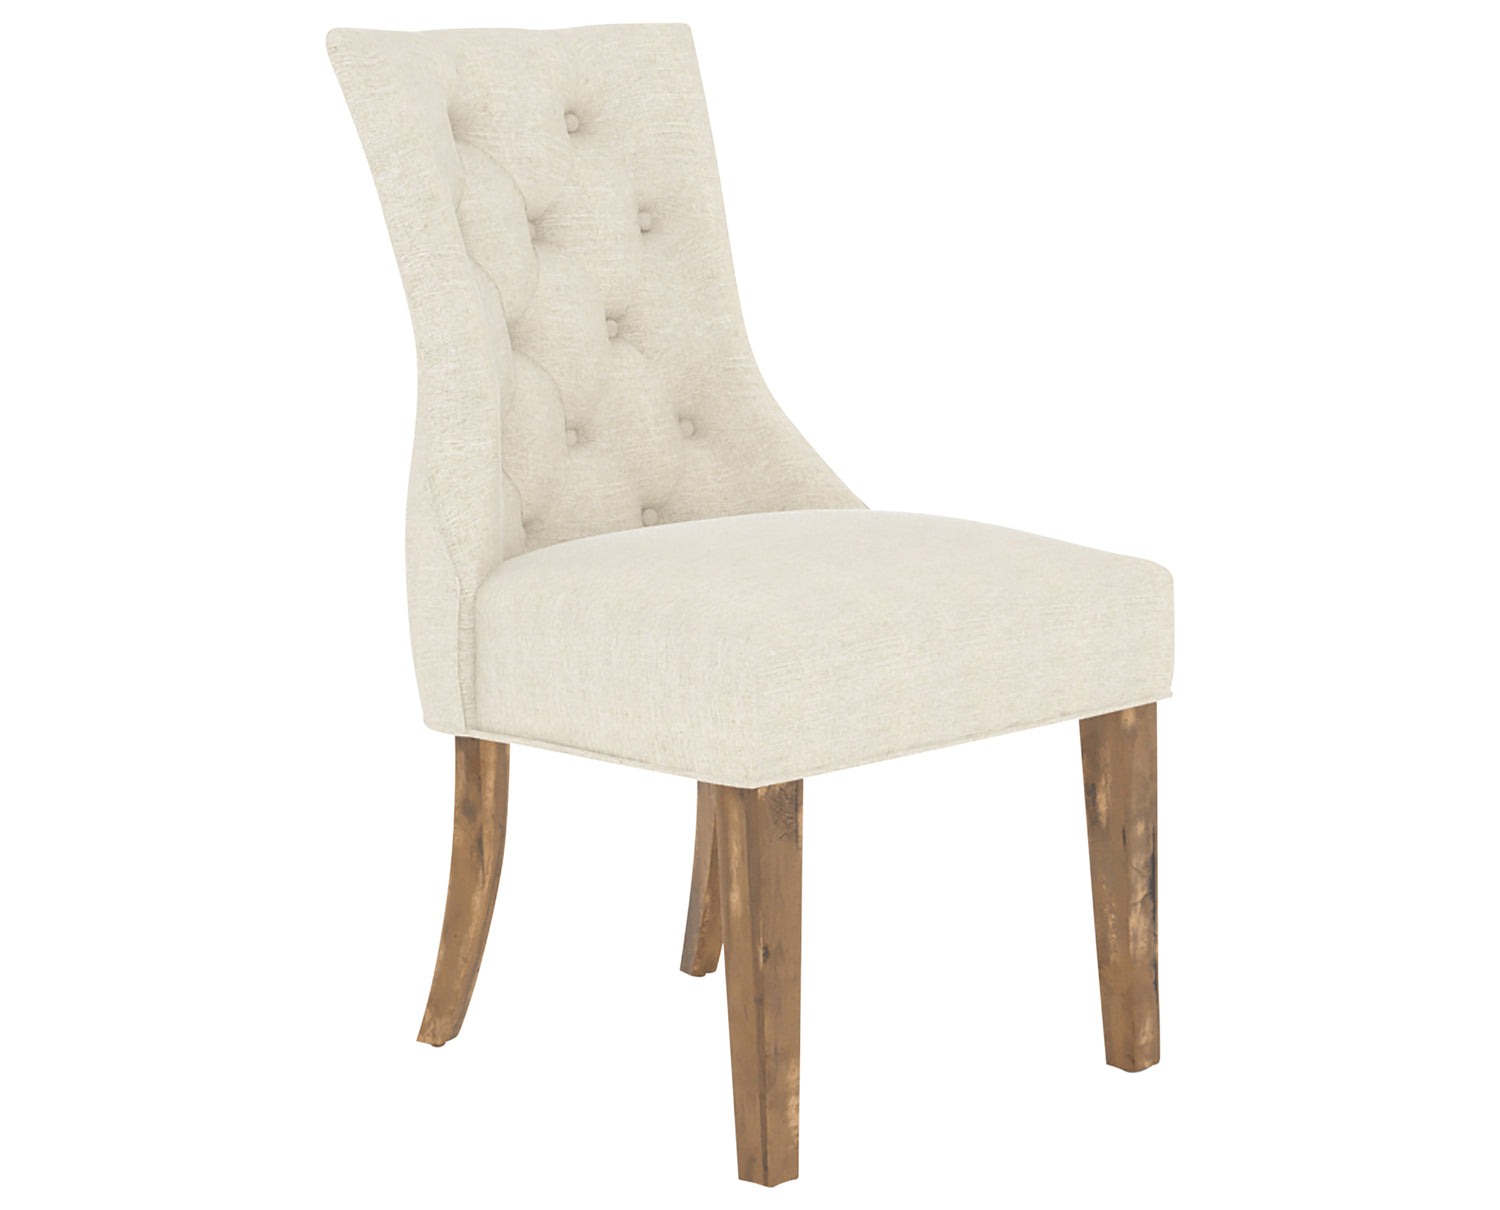 Oak Washed and Fabric TW | Canadel Champlain Dining Chair 317 | Valley Ridge Furniture